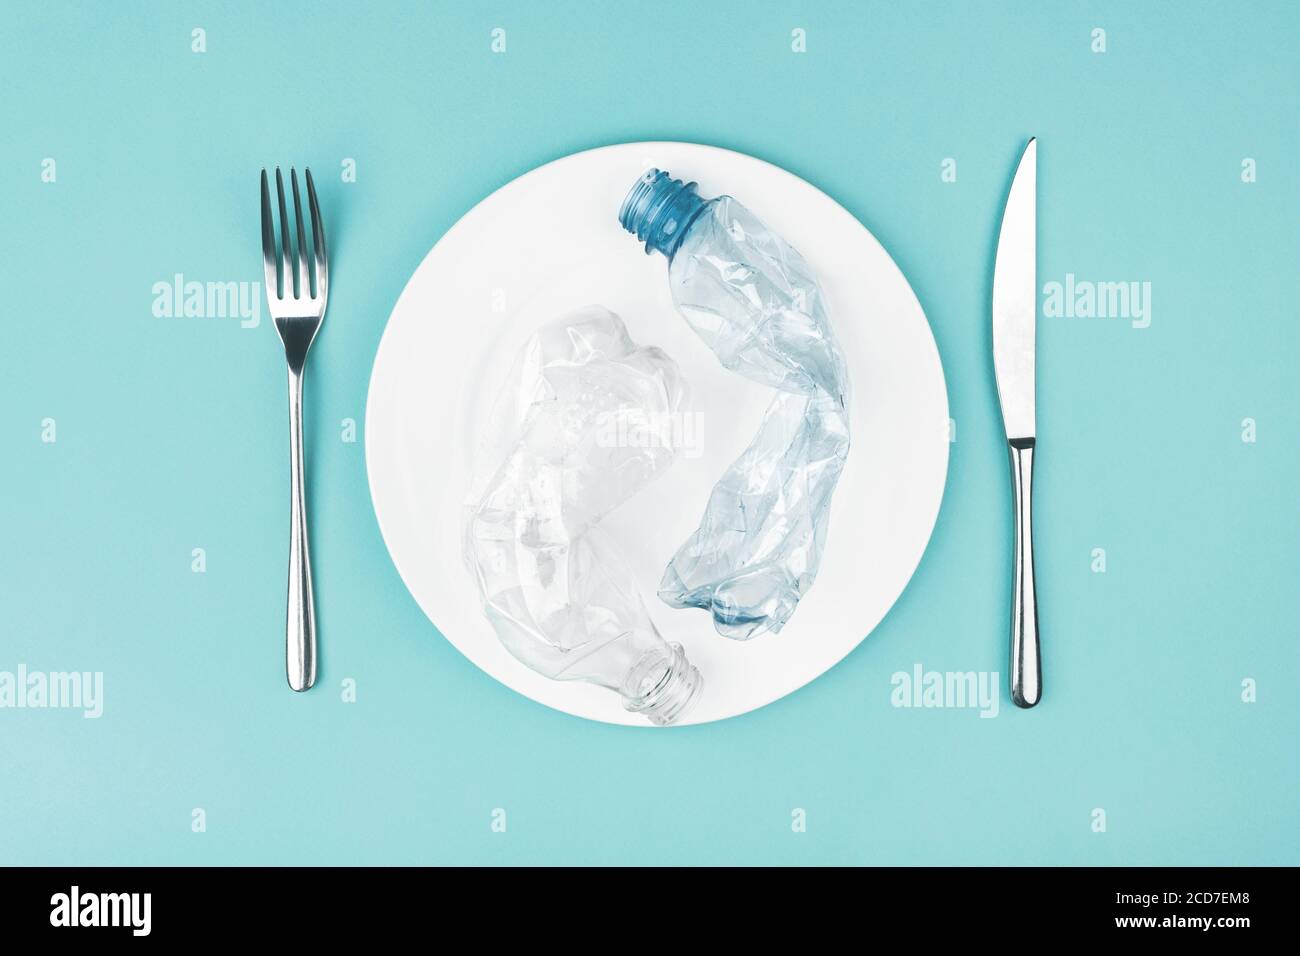 Plate with plastic bottles on blue background. Stock Photo